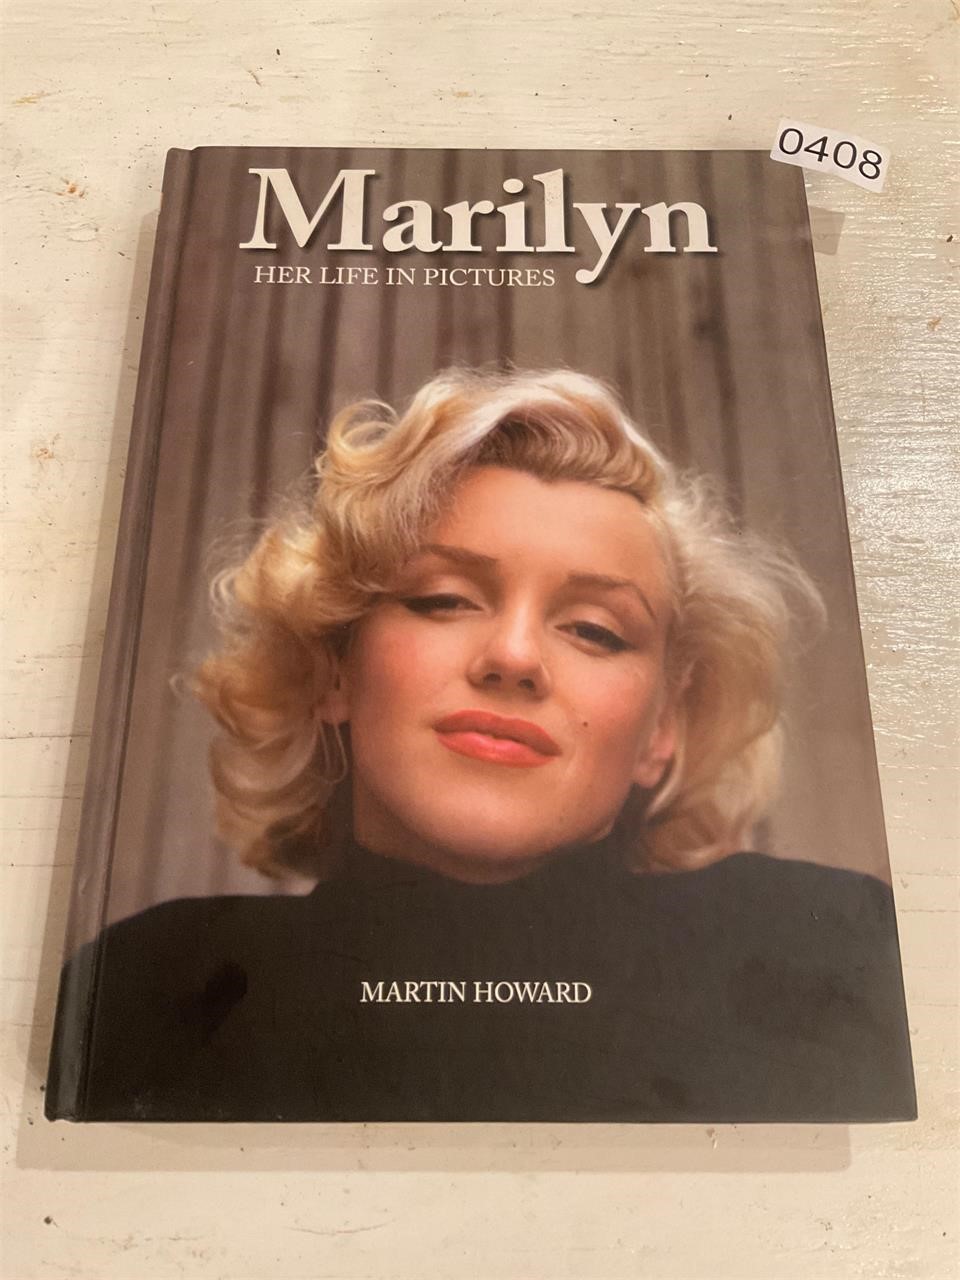 Marilyn Monroe- Book Life in Pictures